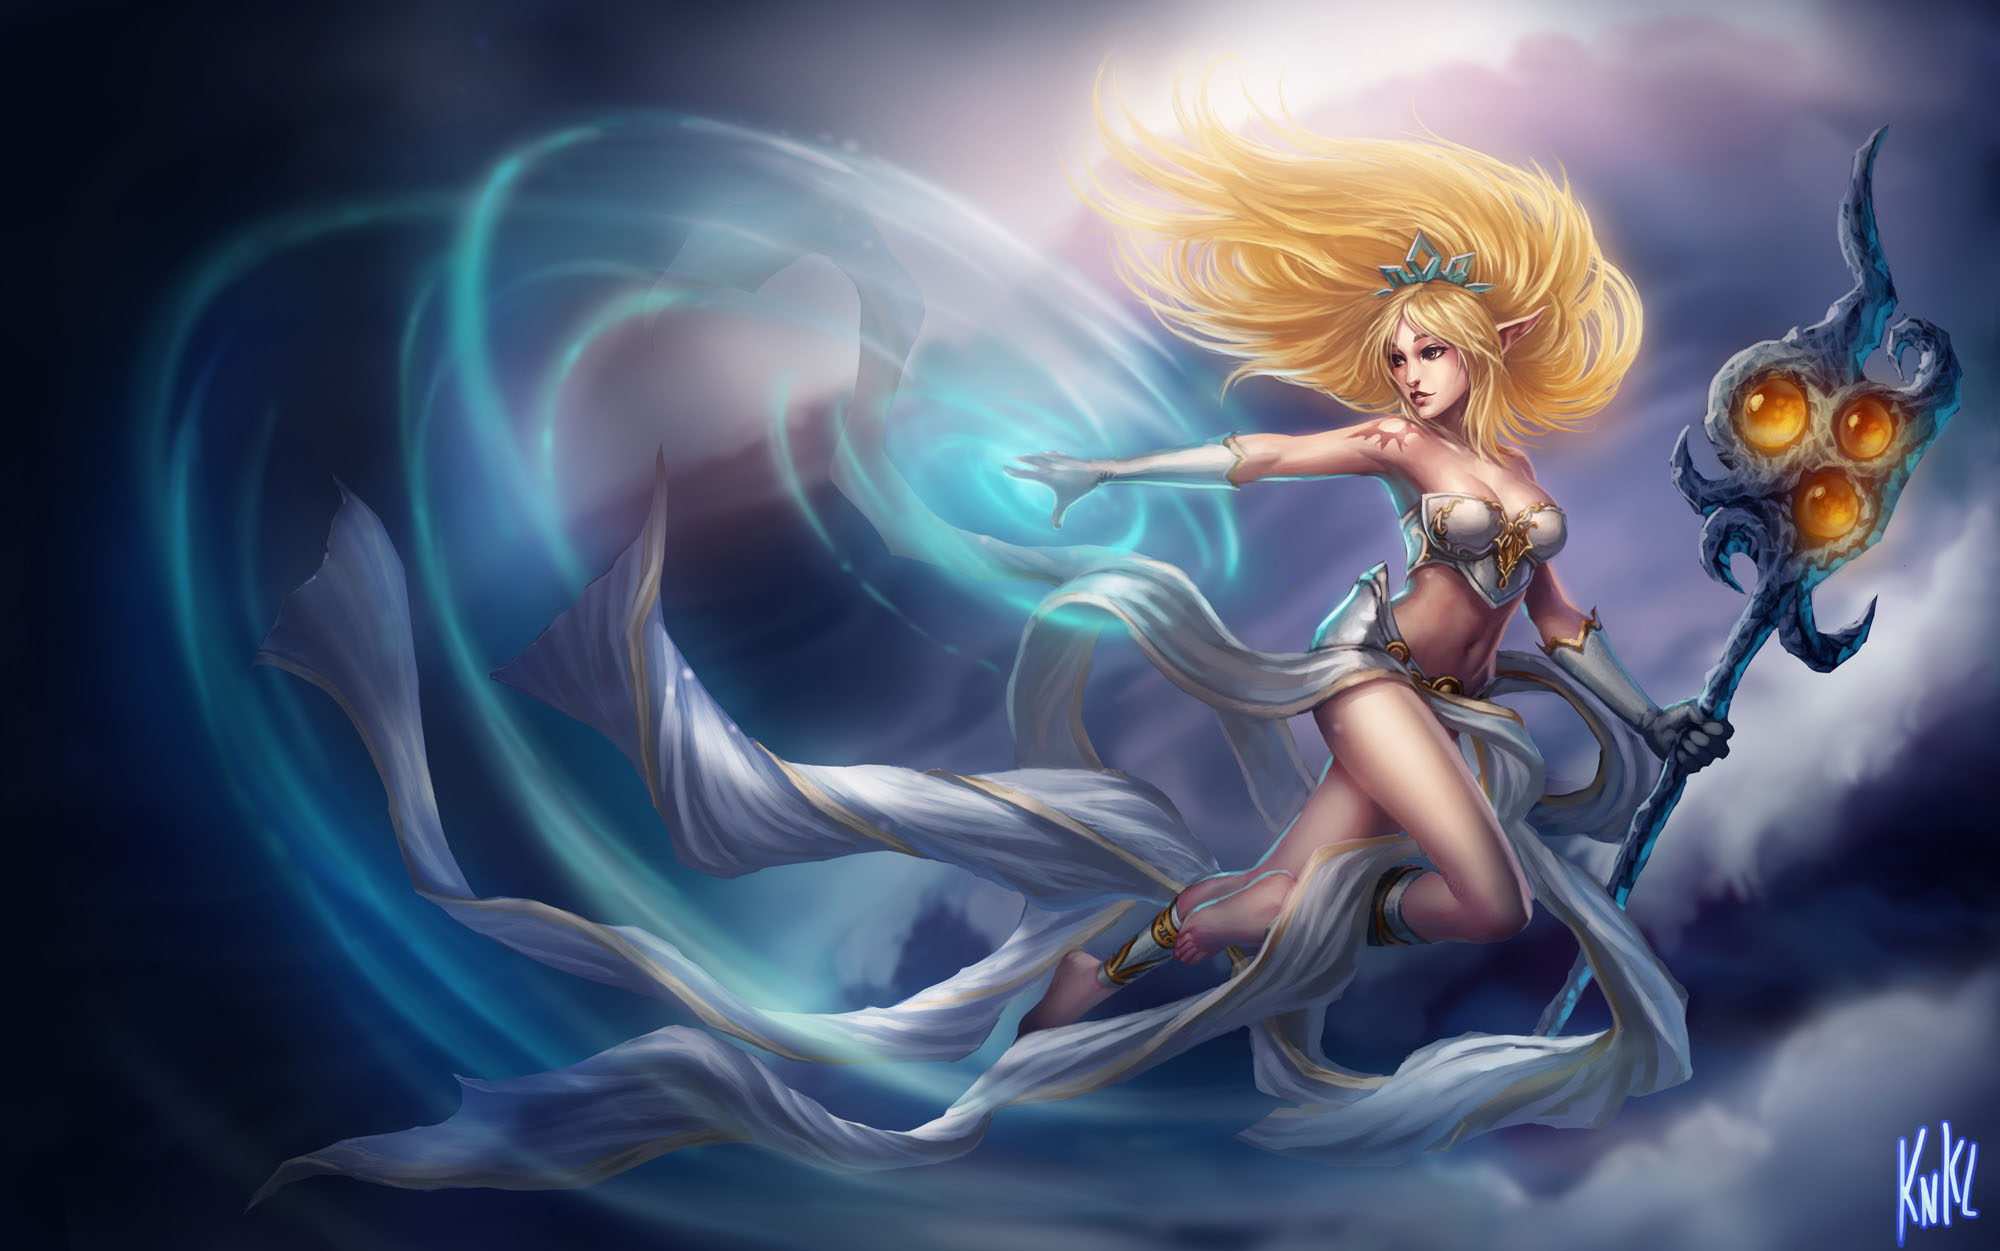 My skin collection grows - League of Legends - VG Community Forums